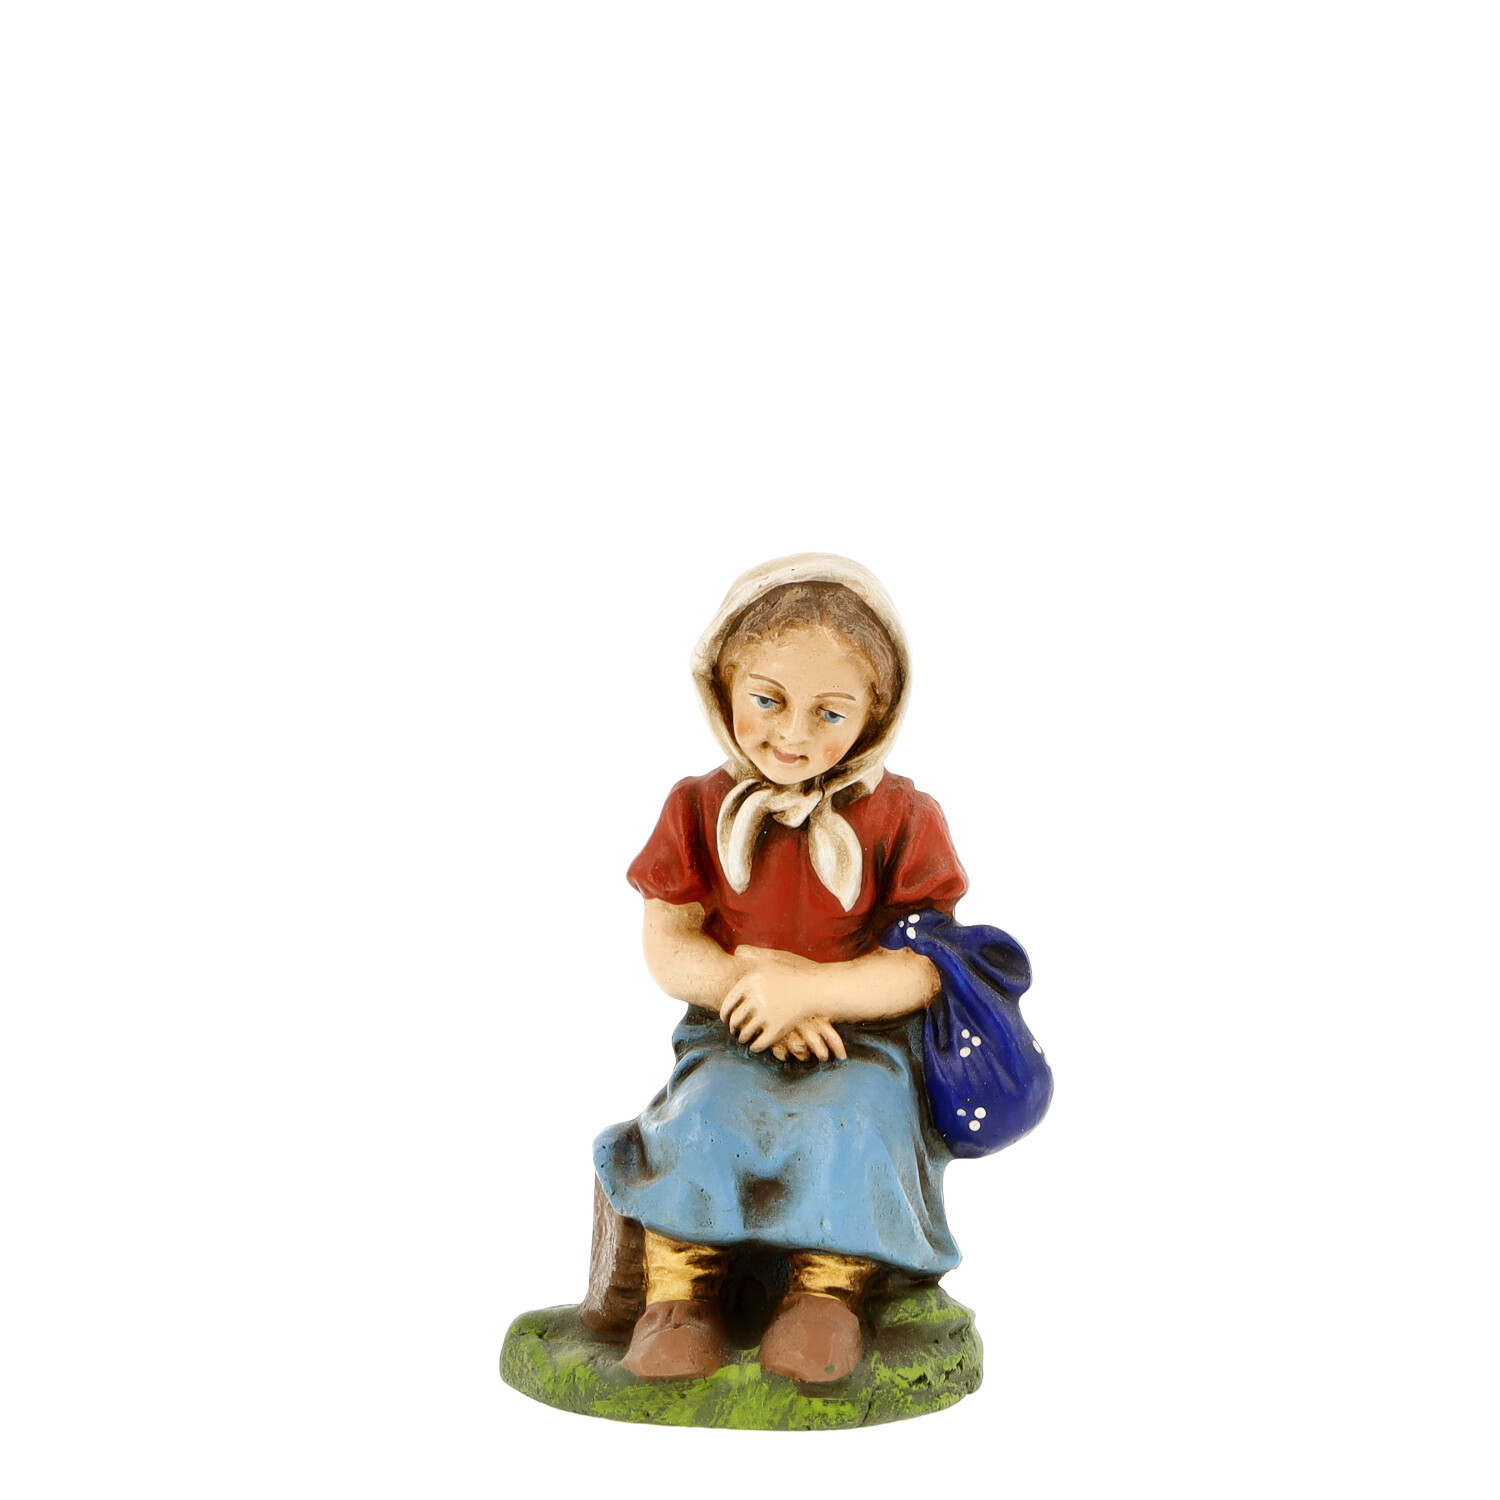 Sitting girl with bale - Marolin Krippenfigur - made in Germany